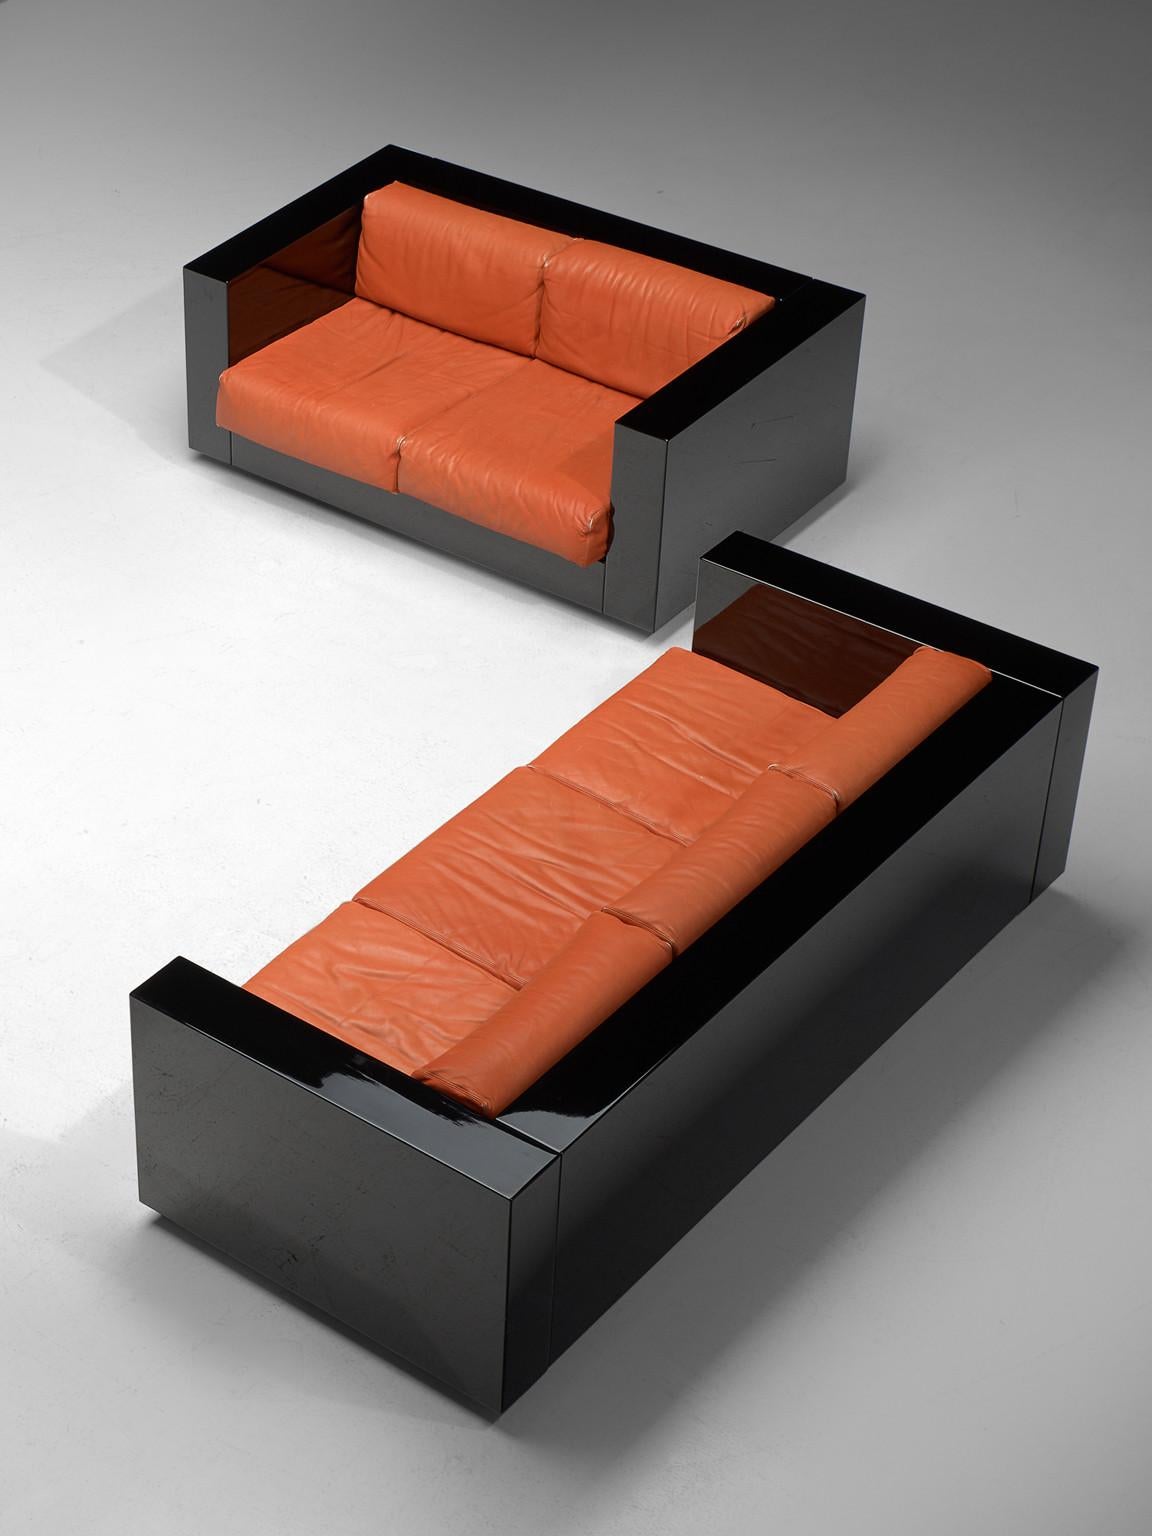 Massimo and Lella Vignelli for Poltronova, Saratoga living room set, black lacquered wood and red leather, Italy, 1964. 

This set of two sofas named 'Sartoga' is designed by Italian designer couple Lella & Massimo Vignelli. The Vignelli's were